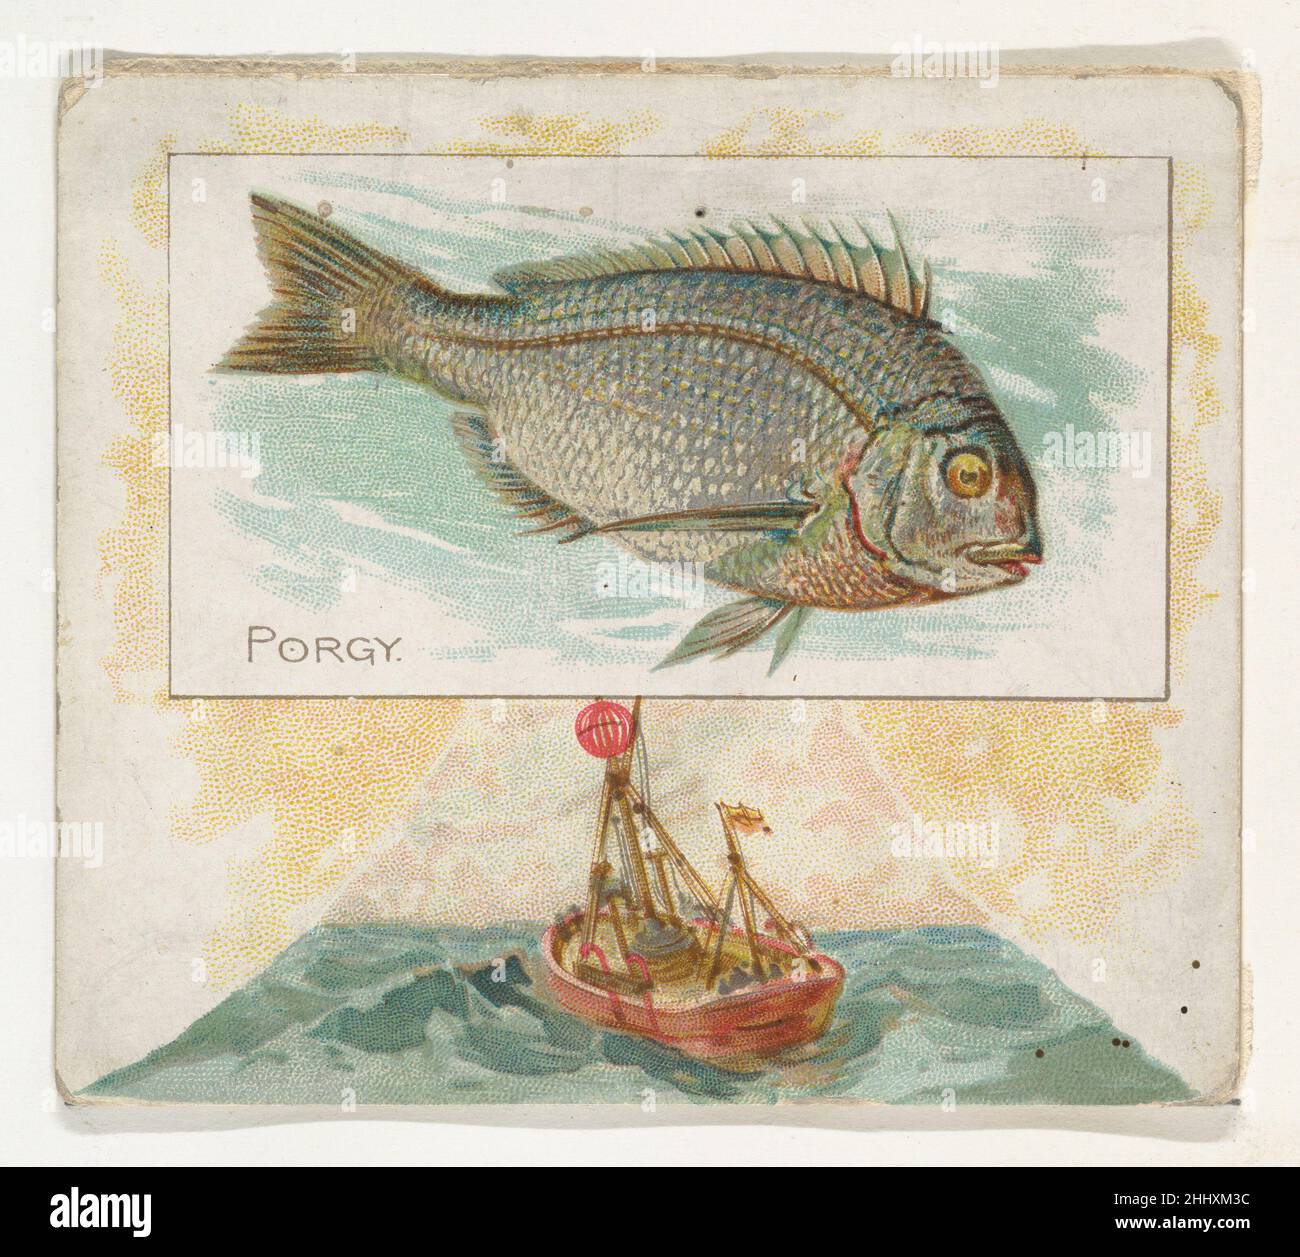 Porgy, from Fish from American Waters series (N39) for Allen & Ginter Cigarettes 1889 Issued by Allen & Ginter American Trade cards from the 'Fish from American Waters' series (N39), issued in 1889 in a set of 50 cards to promote Allen & Ginter brand cigarettes.. Porgy, from Fish from American Waters series (N39) for Allen & Ginter Cigarettes  420168 Stock Photo